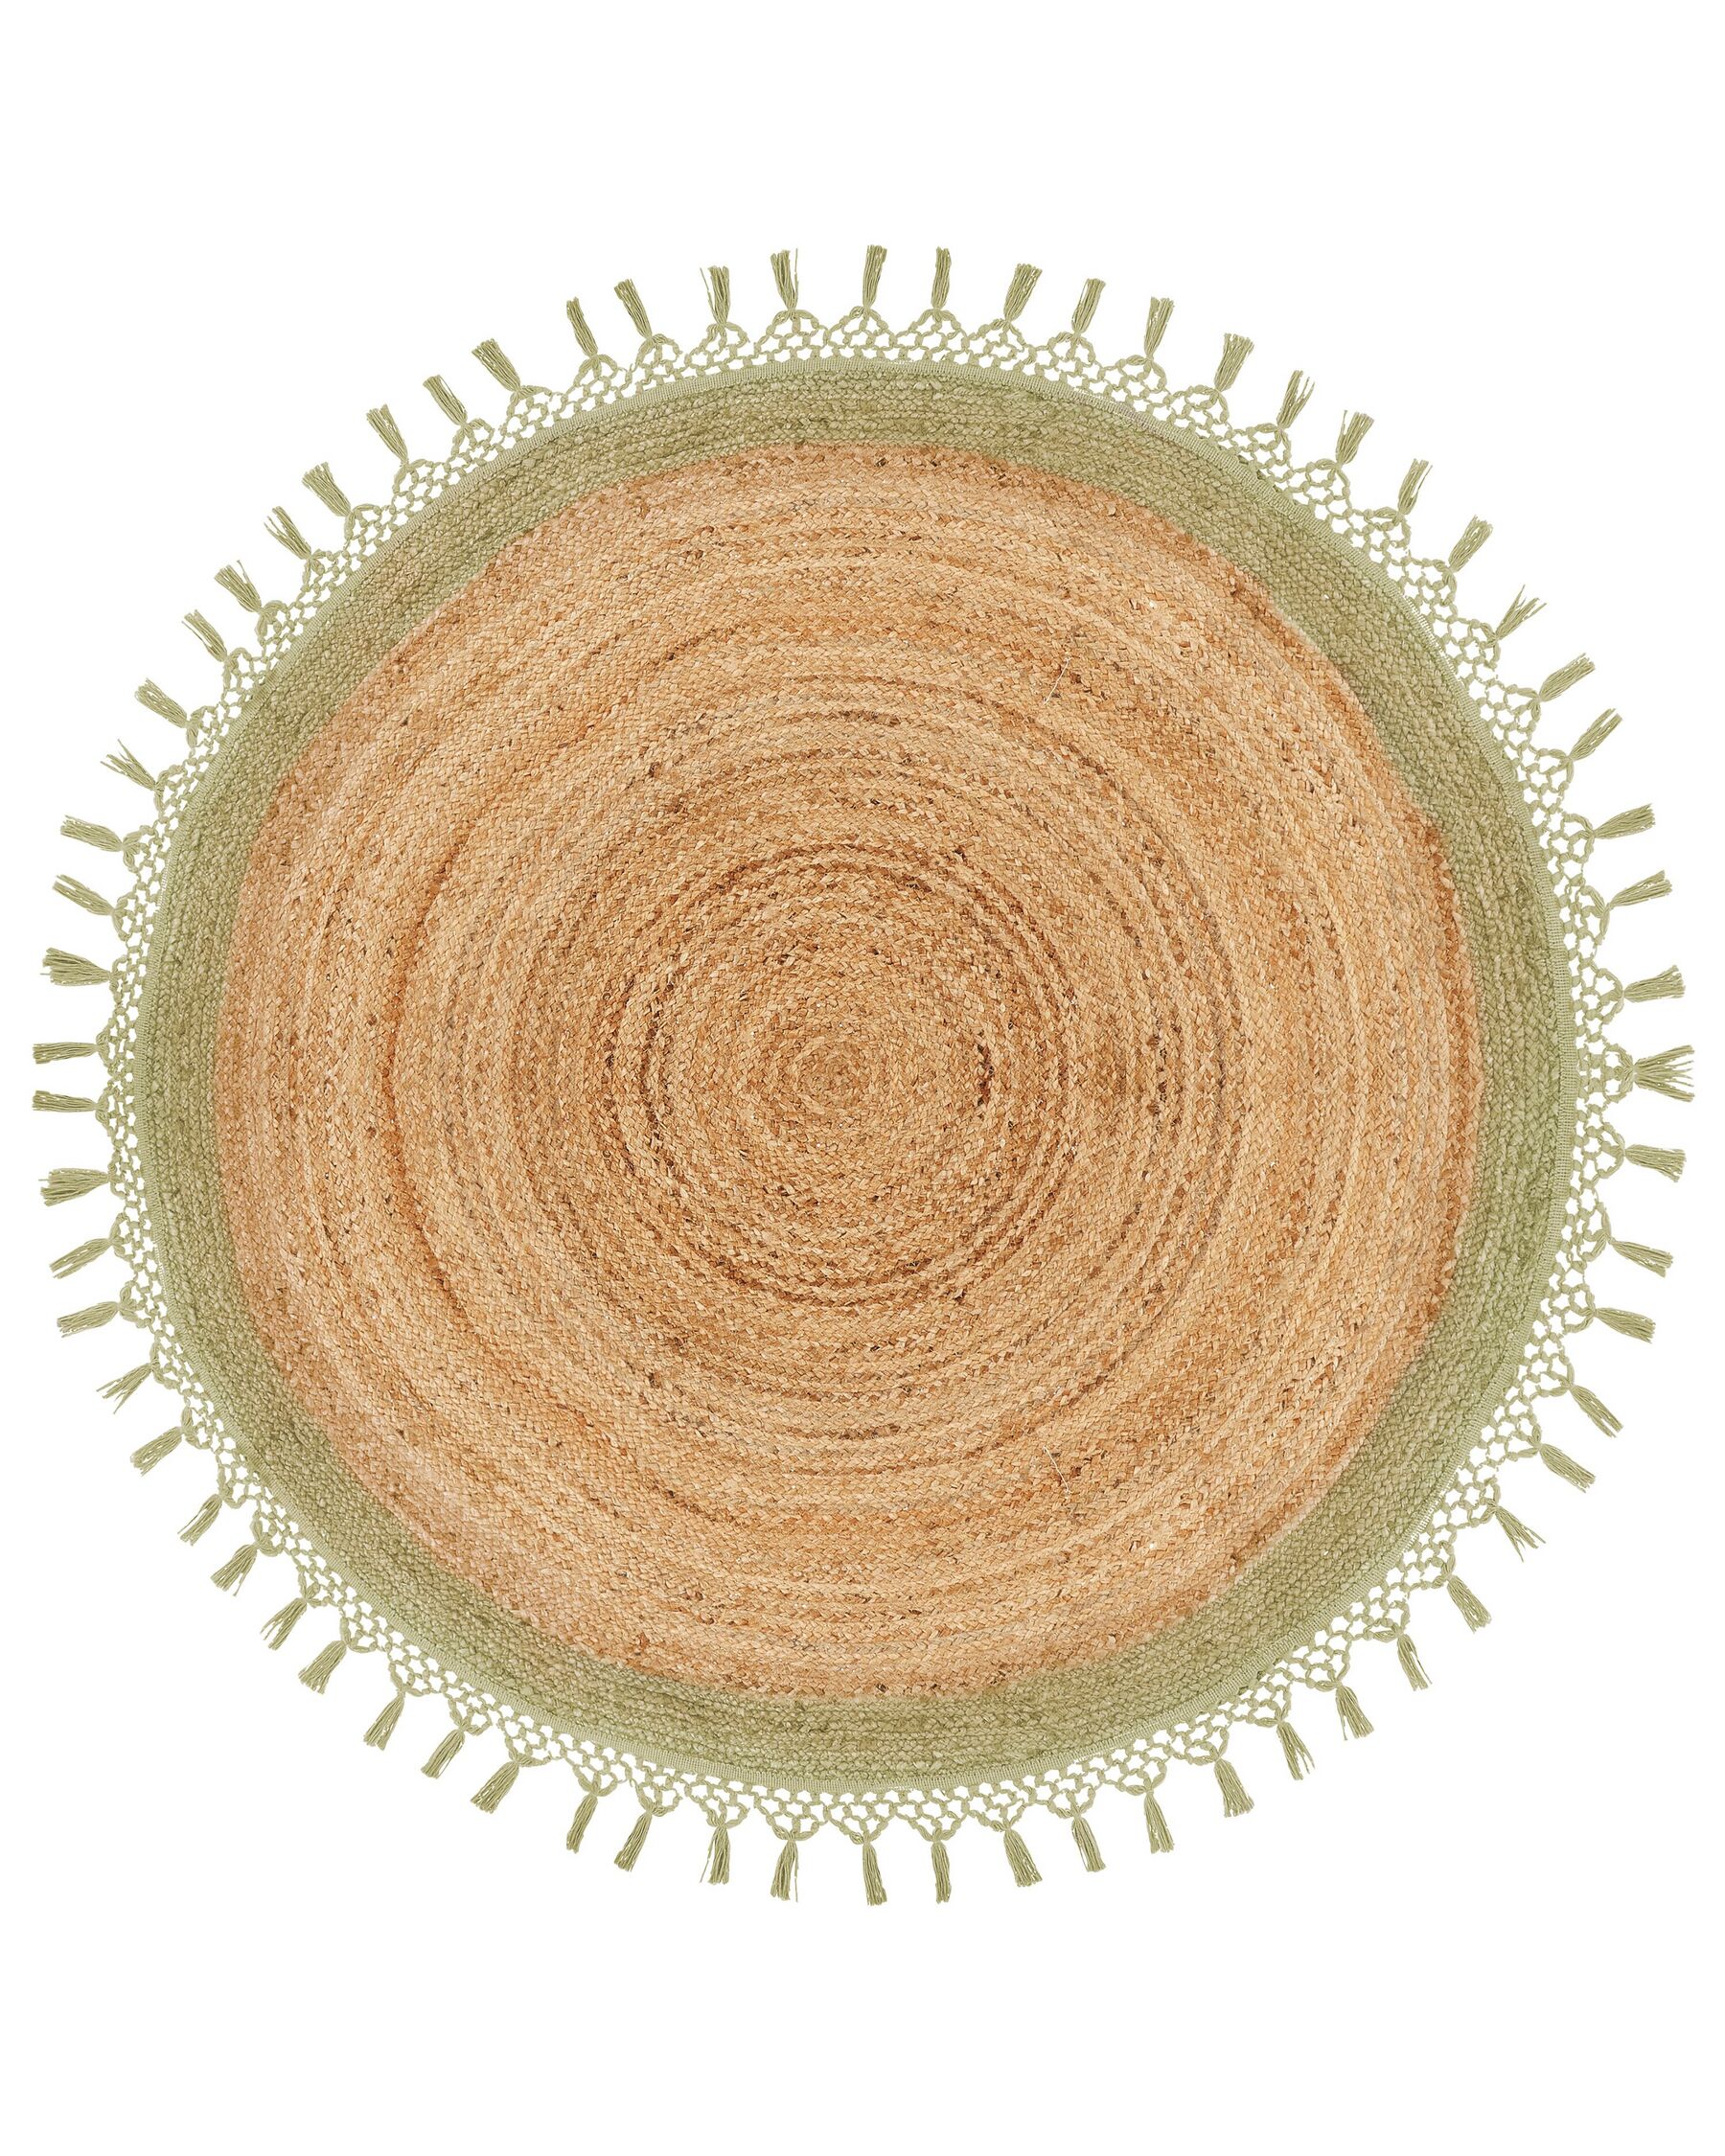 Round Jute Area Rug ⌀ 140 cm Beige and Green MARTS_869926